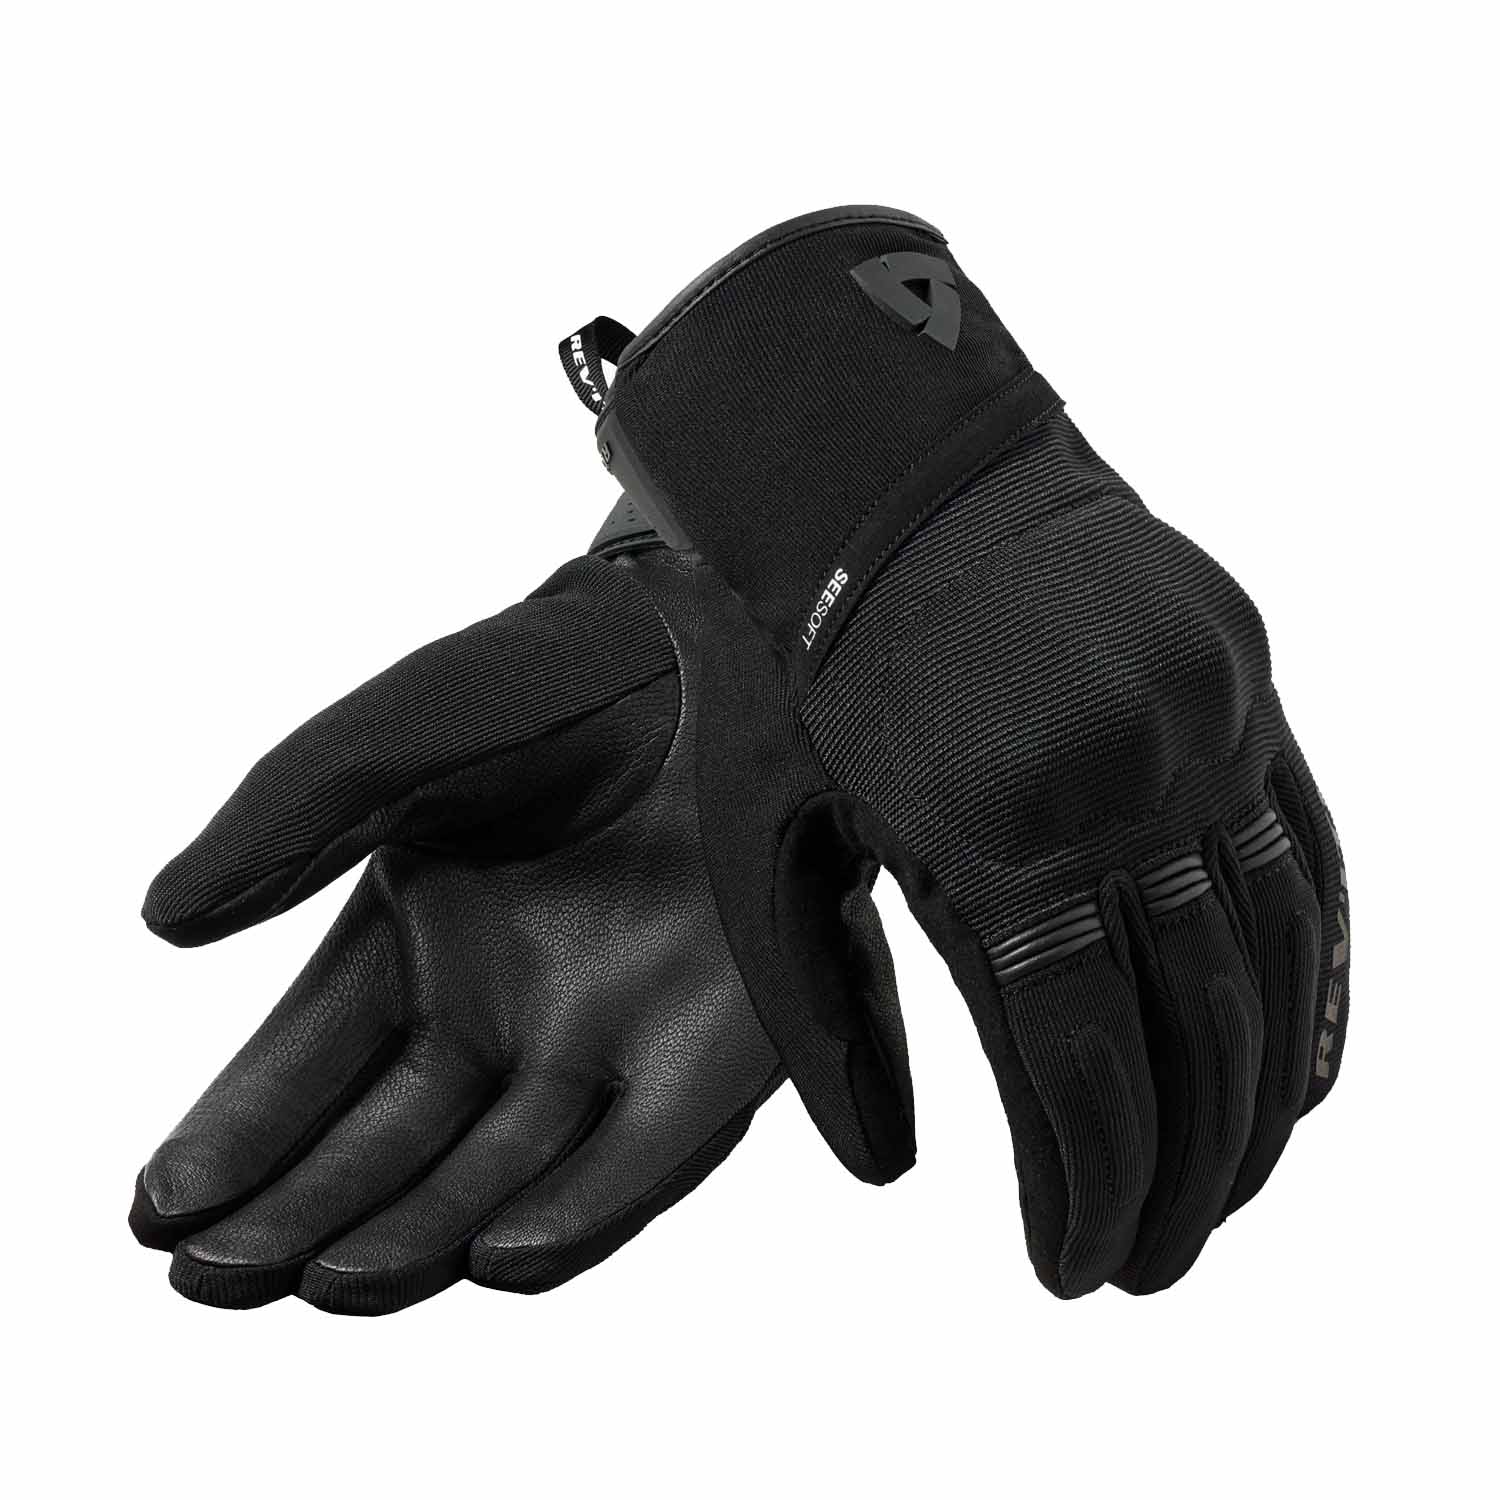 Image of REV'IT! Mosca 2 H2O Gloves Black Taille 2XL